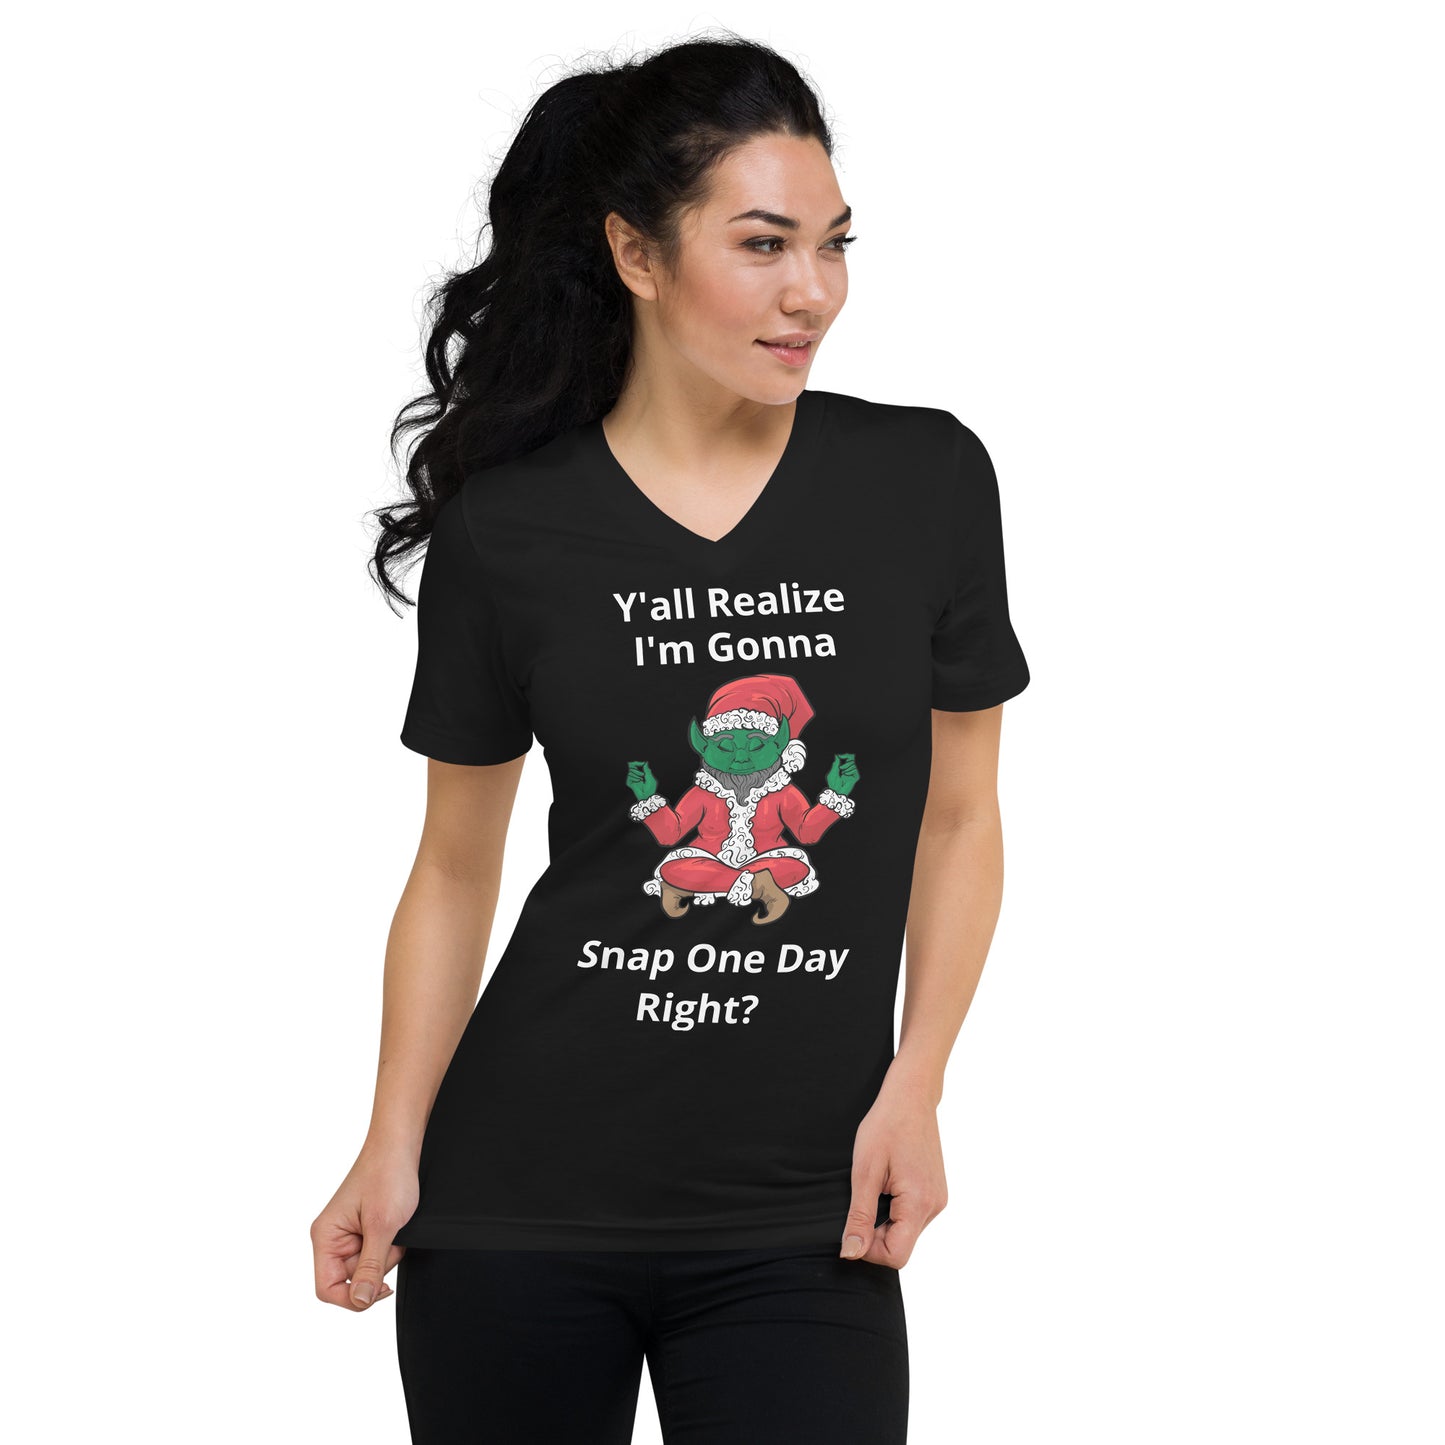 Unisex Short Sleeve V-Neck T-Shirt - The Grinch Y'all Realize I'm Gonna Snap One Day Riight?